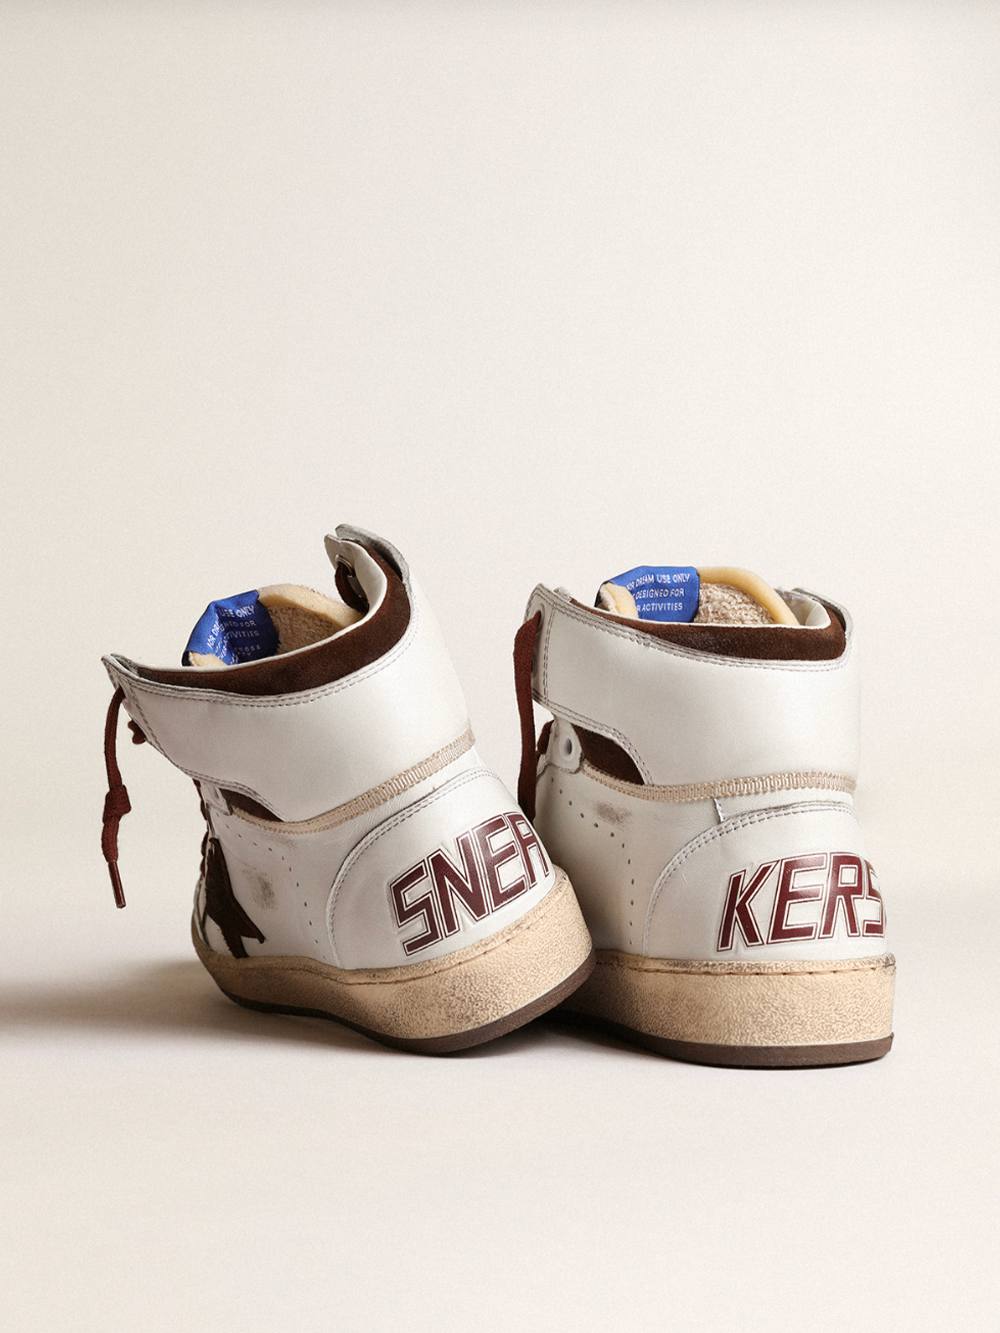 SNEAKERS SKY STAR NAPPA UPPER AND SPUR